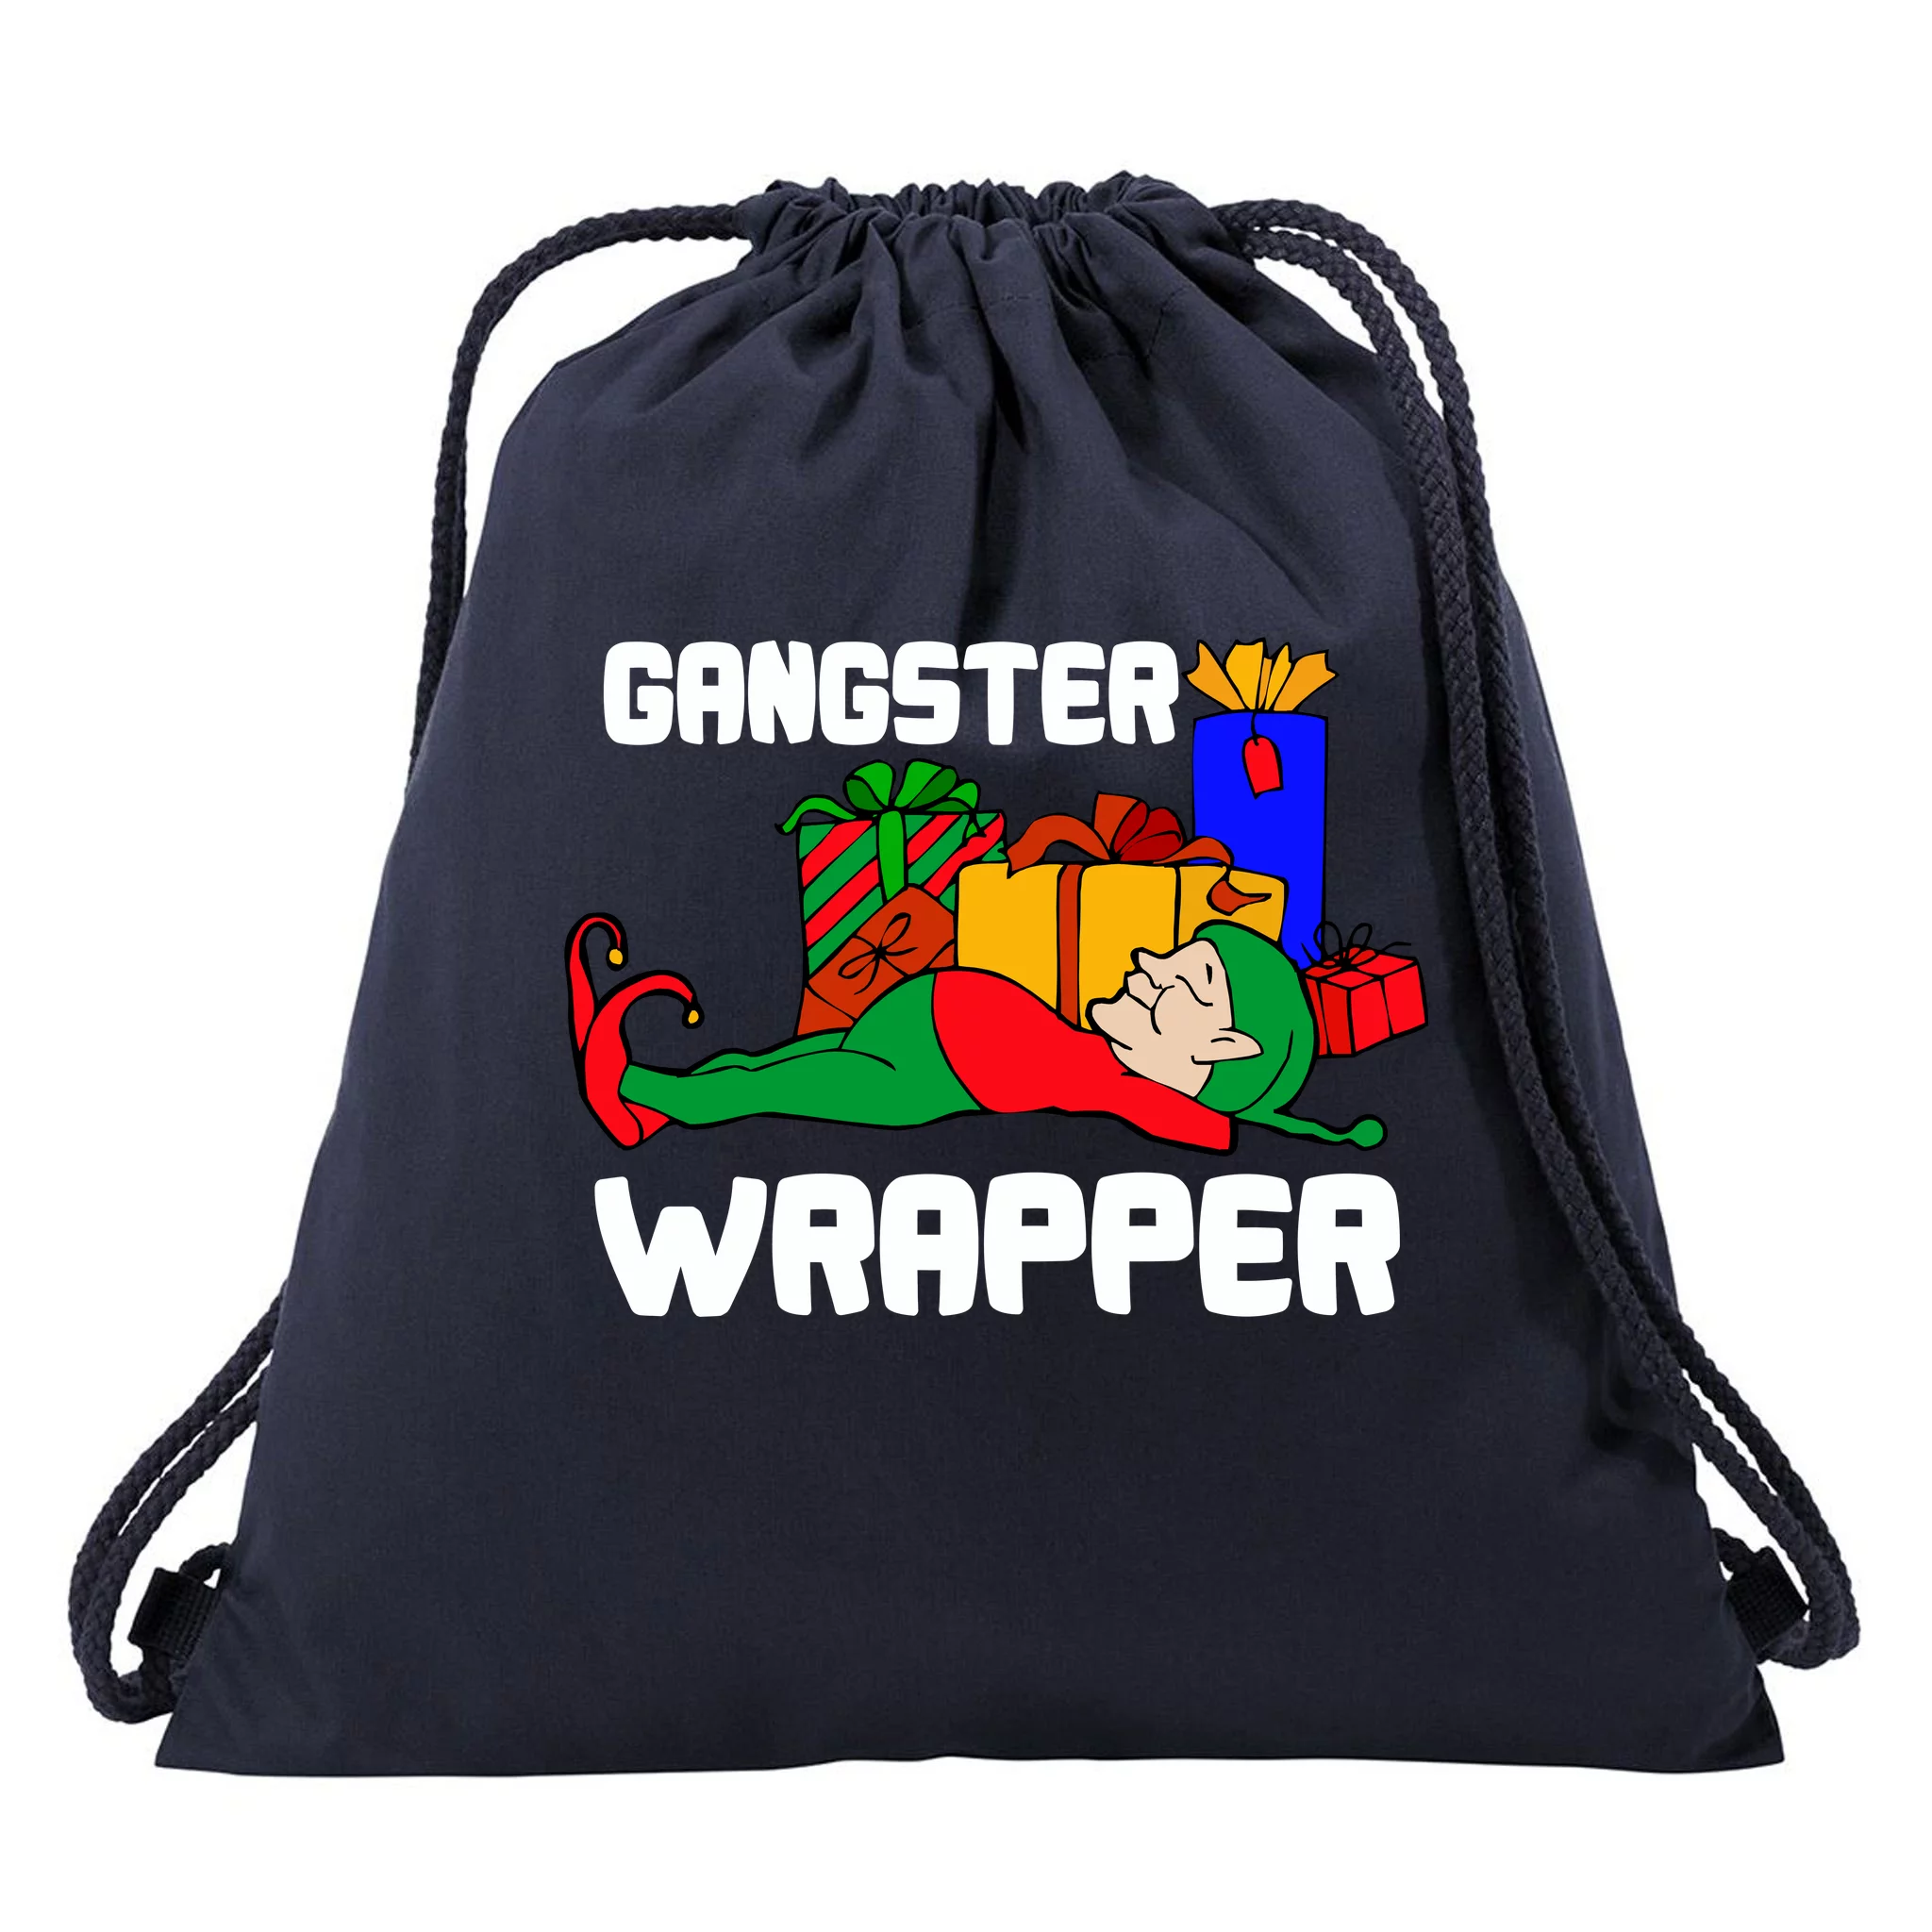 Gangster Bags & Backpacks | Unique Designs | Spreadshirt